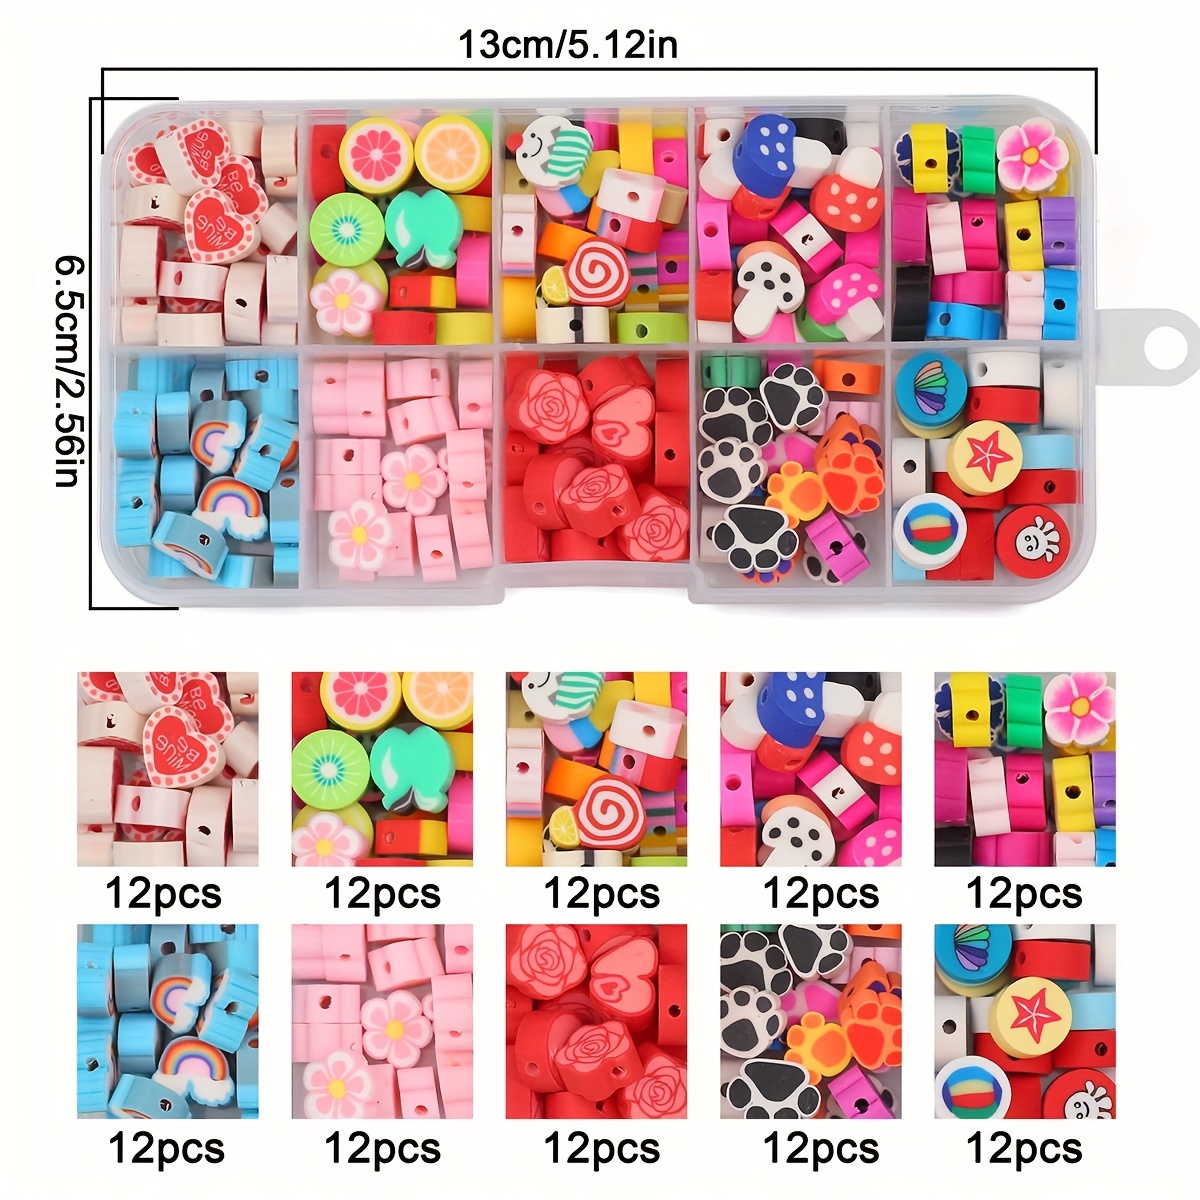 24 Grid Flat Polymer Clay Spacer Beads Box For Diy Bohemian